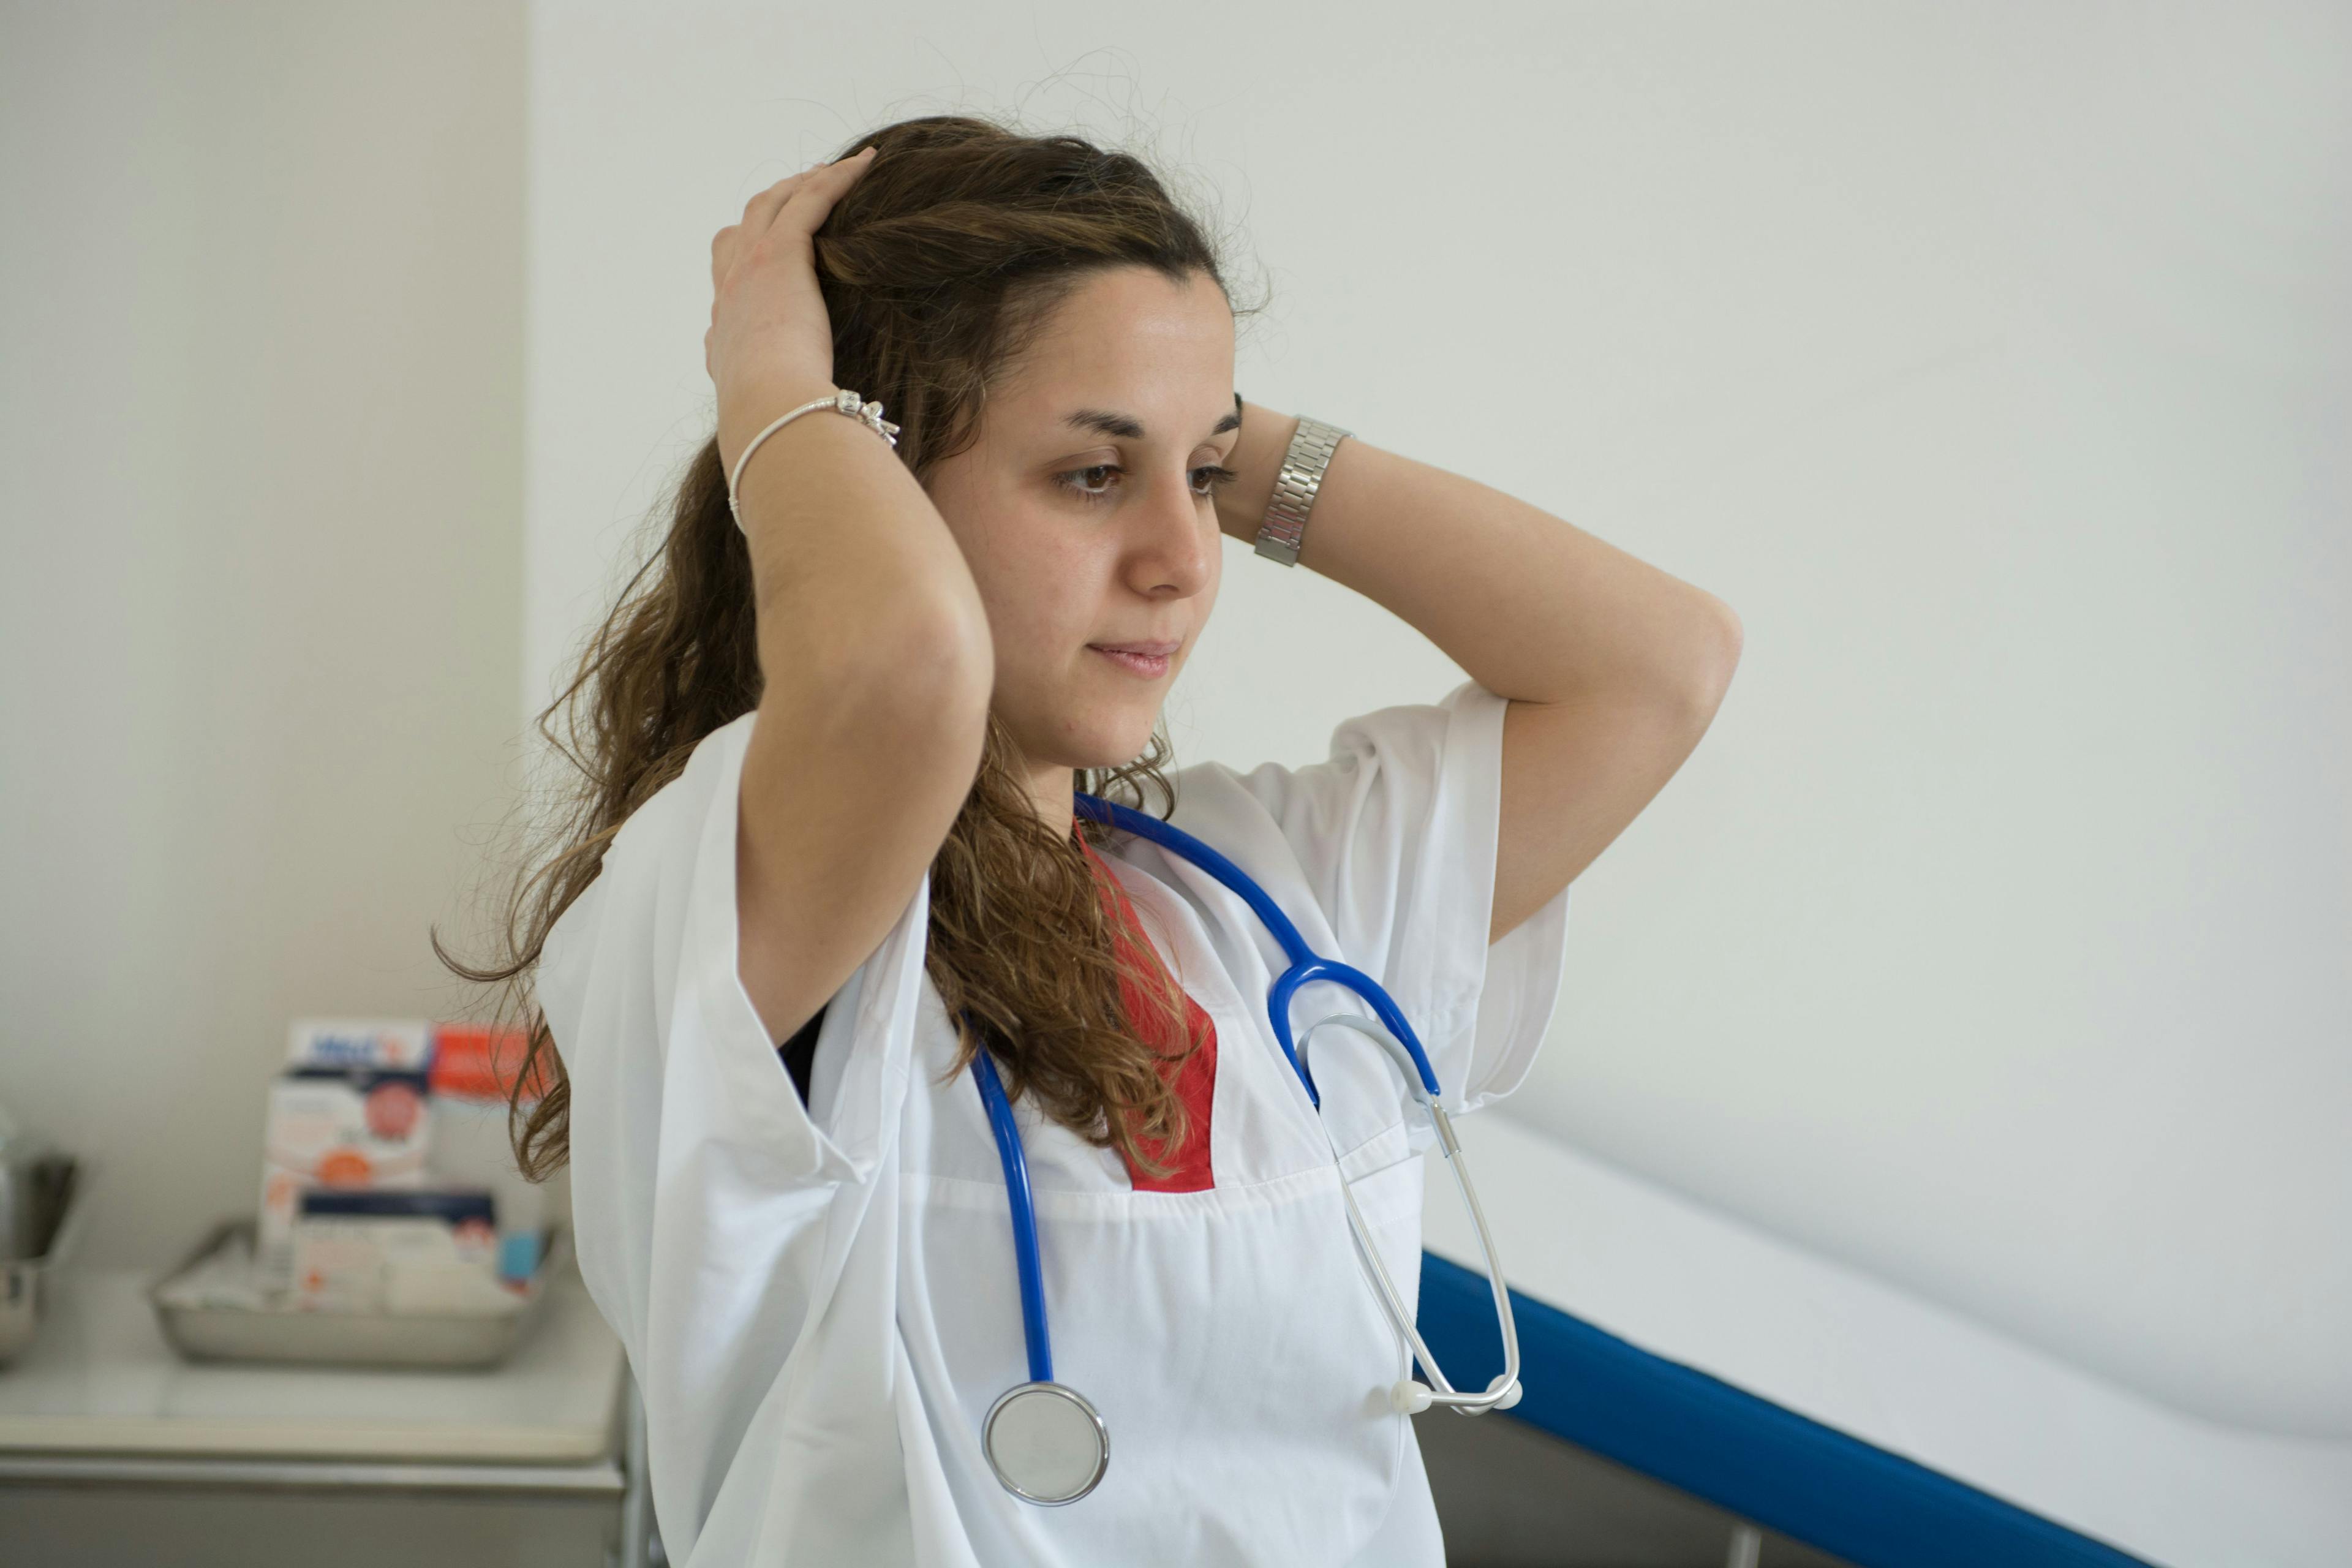 Survey: High Levels of Burnout are Prevalent Among Hematology/Oncology Pharmacists